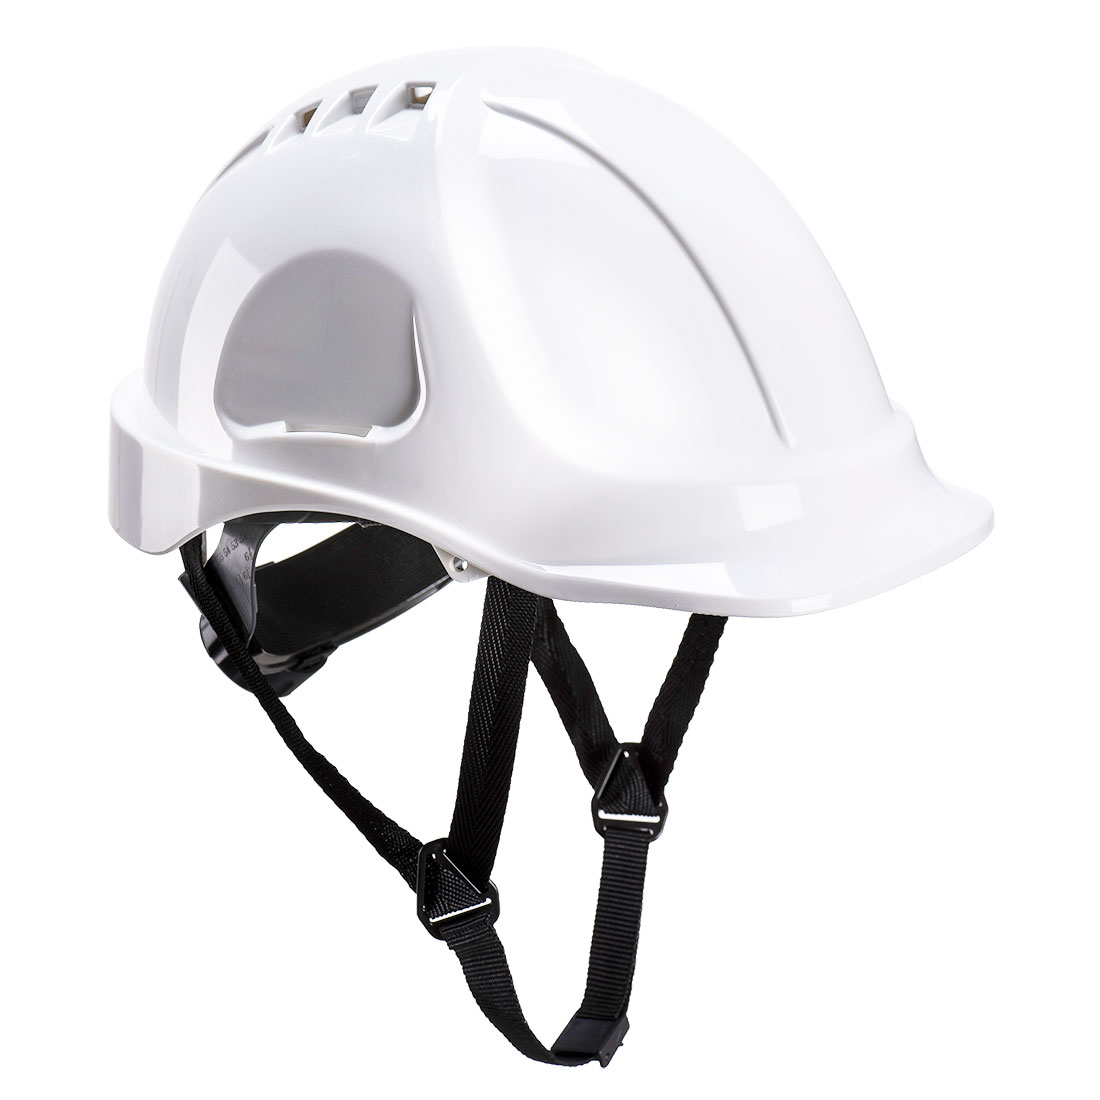 PORTWEST PS55 VENTED SAFETY HELMET white